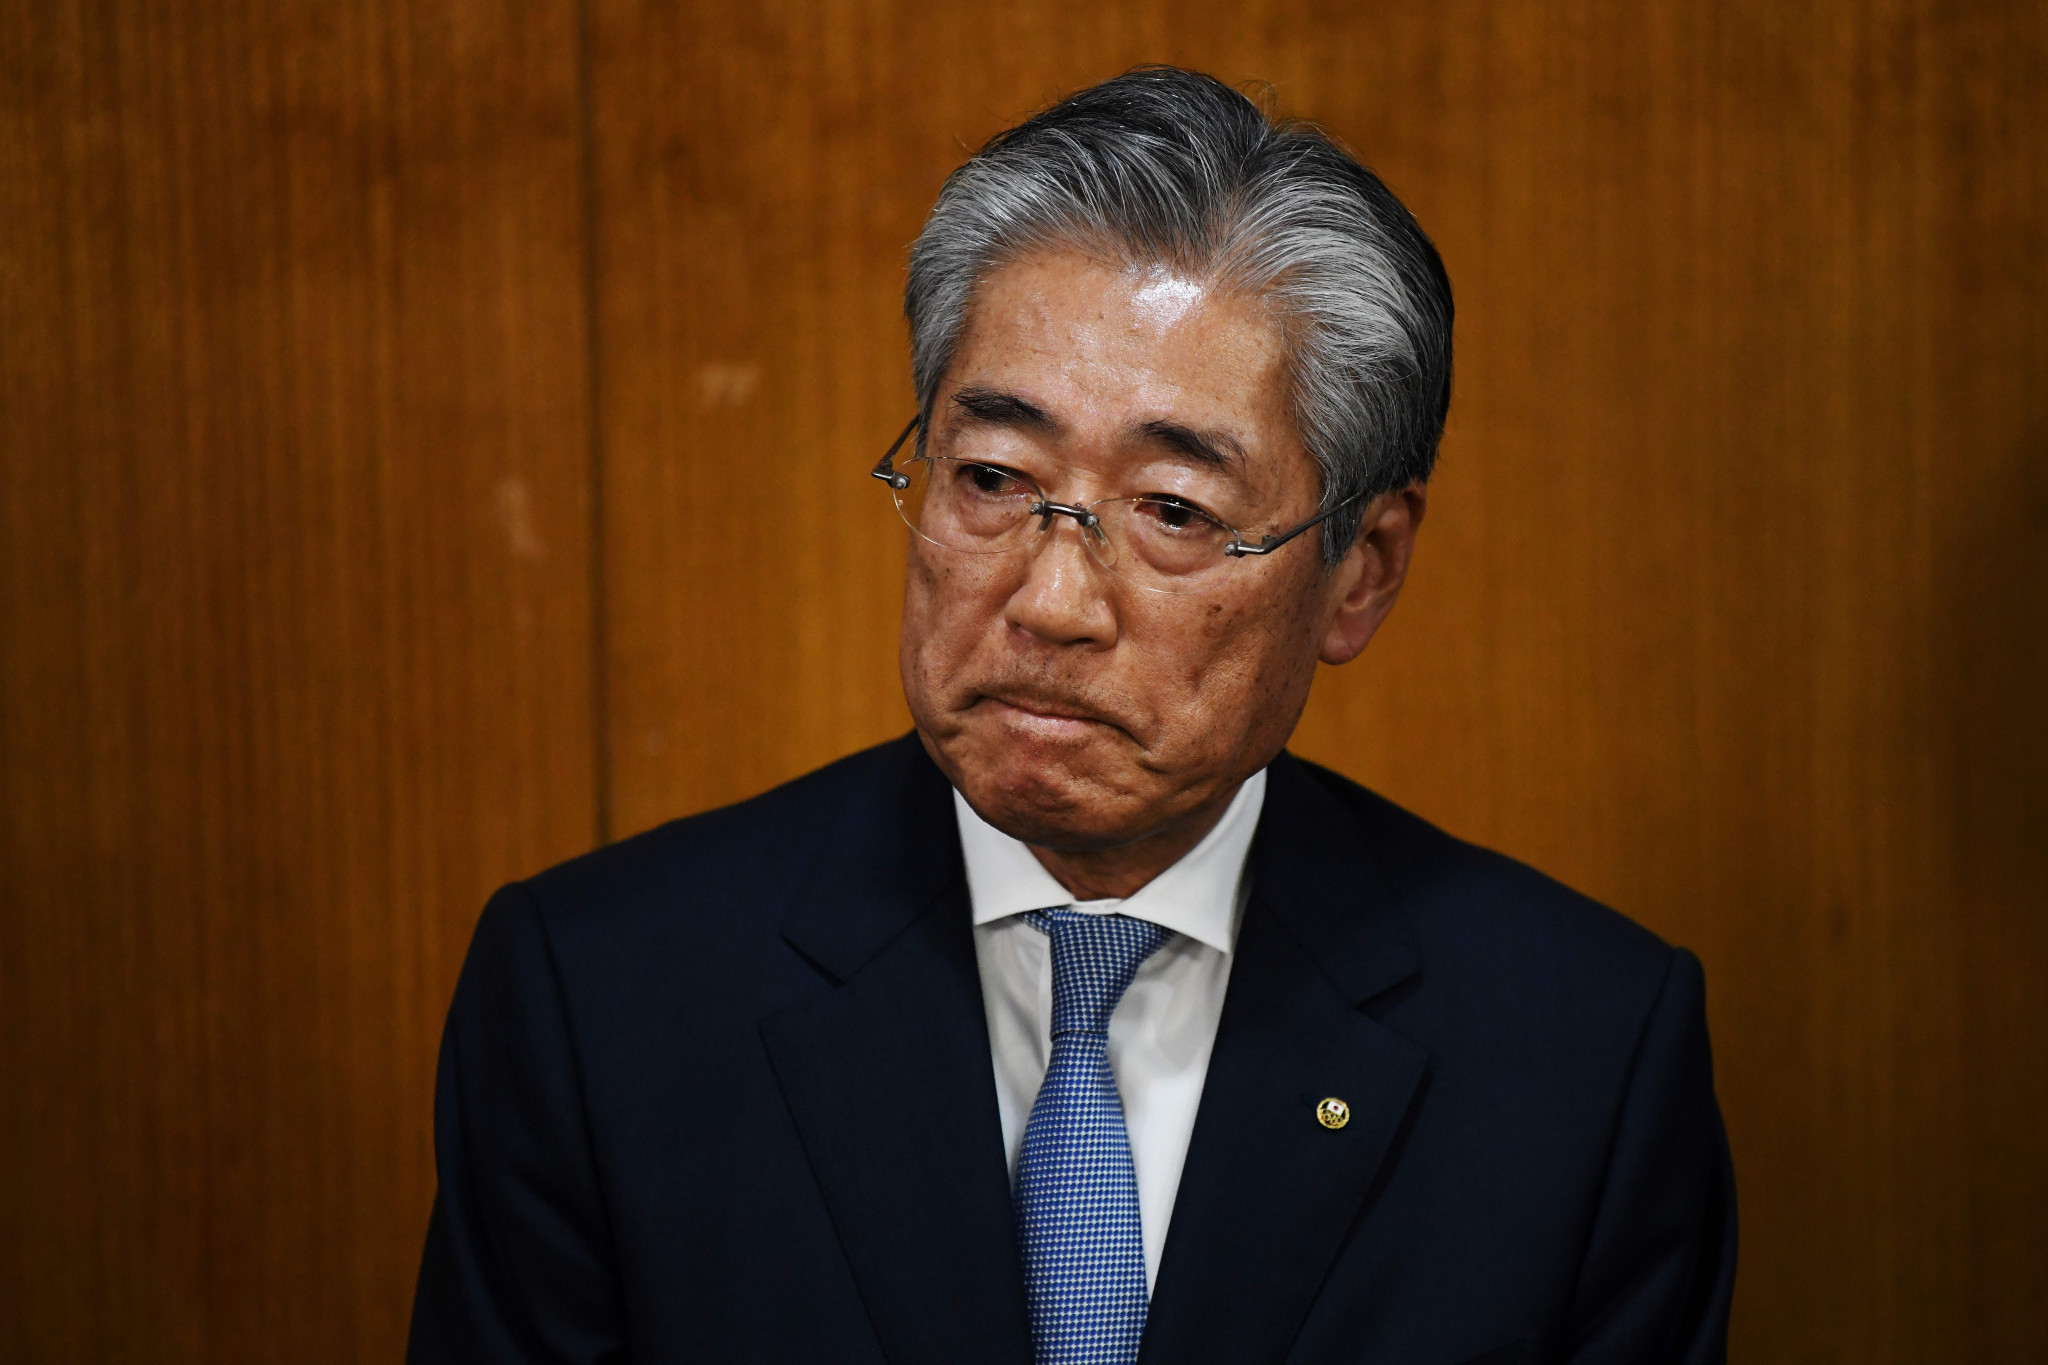 Tsunekazu Takeda had been the JOC's longest-serving President before the allegations, which he denies, emerged ©Getty Images